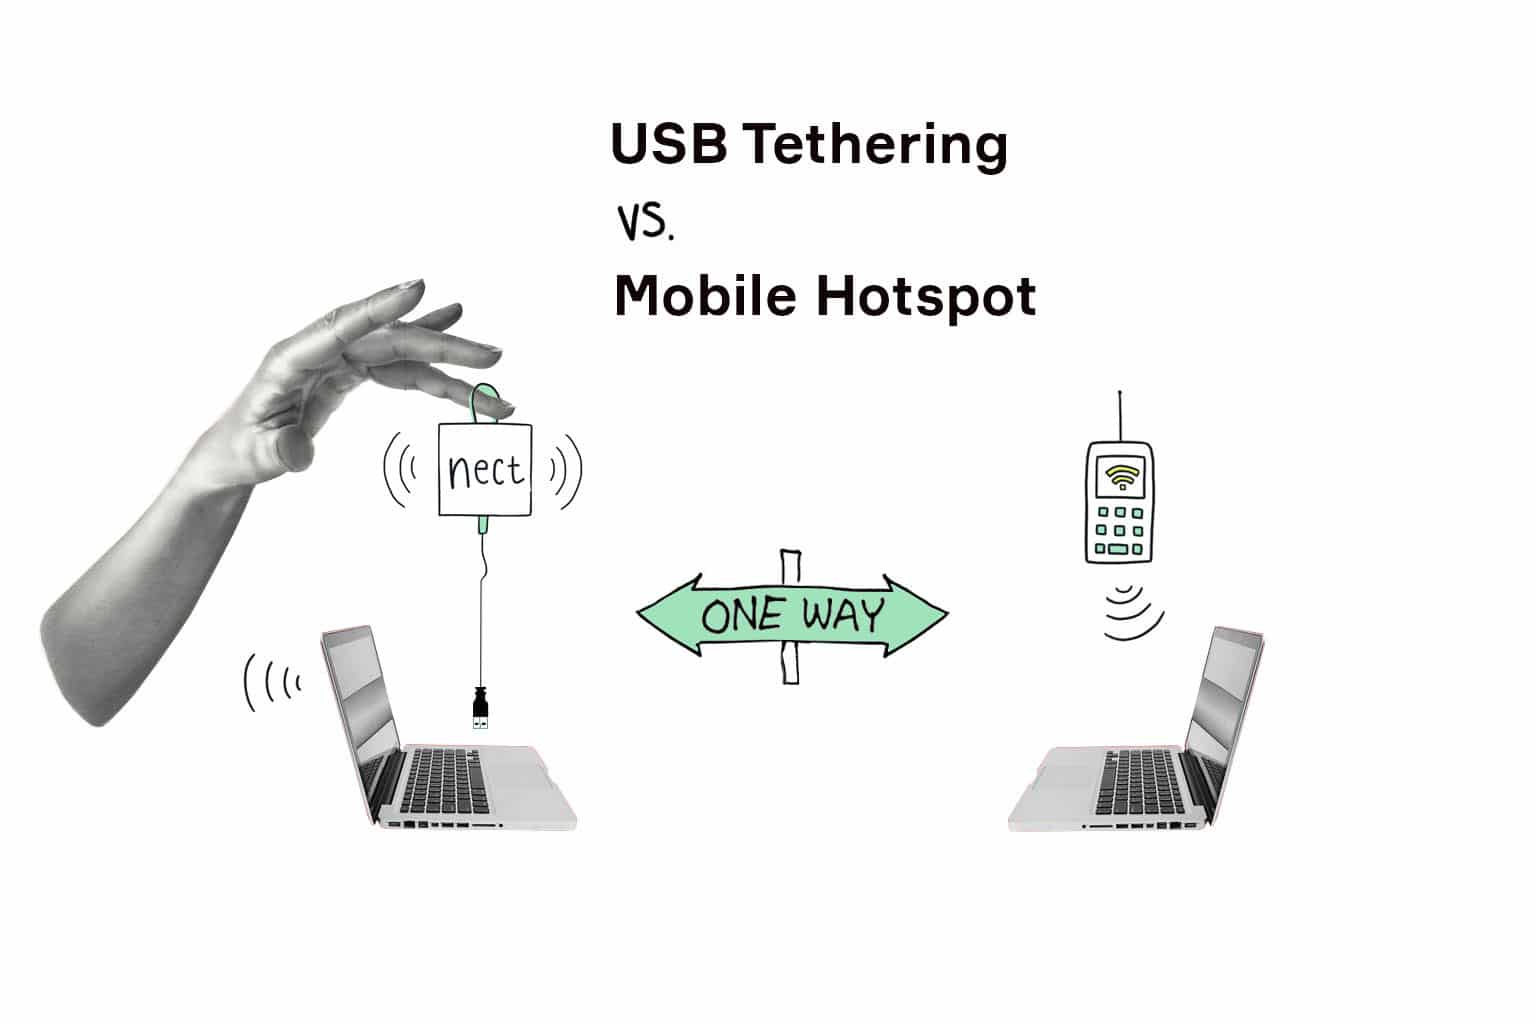 Trivial Himlen tabe USB Tethering vs Mobile Hotspot: Which Is Better? | nect MODEM